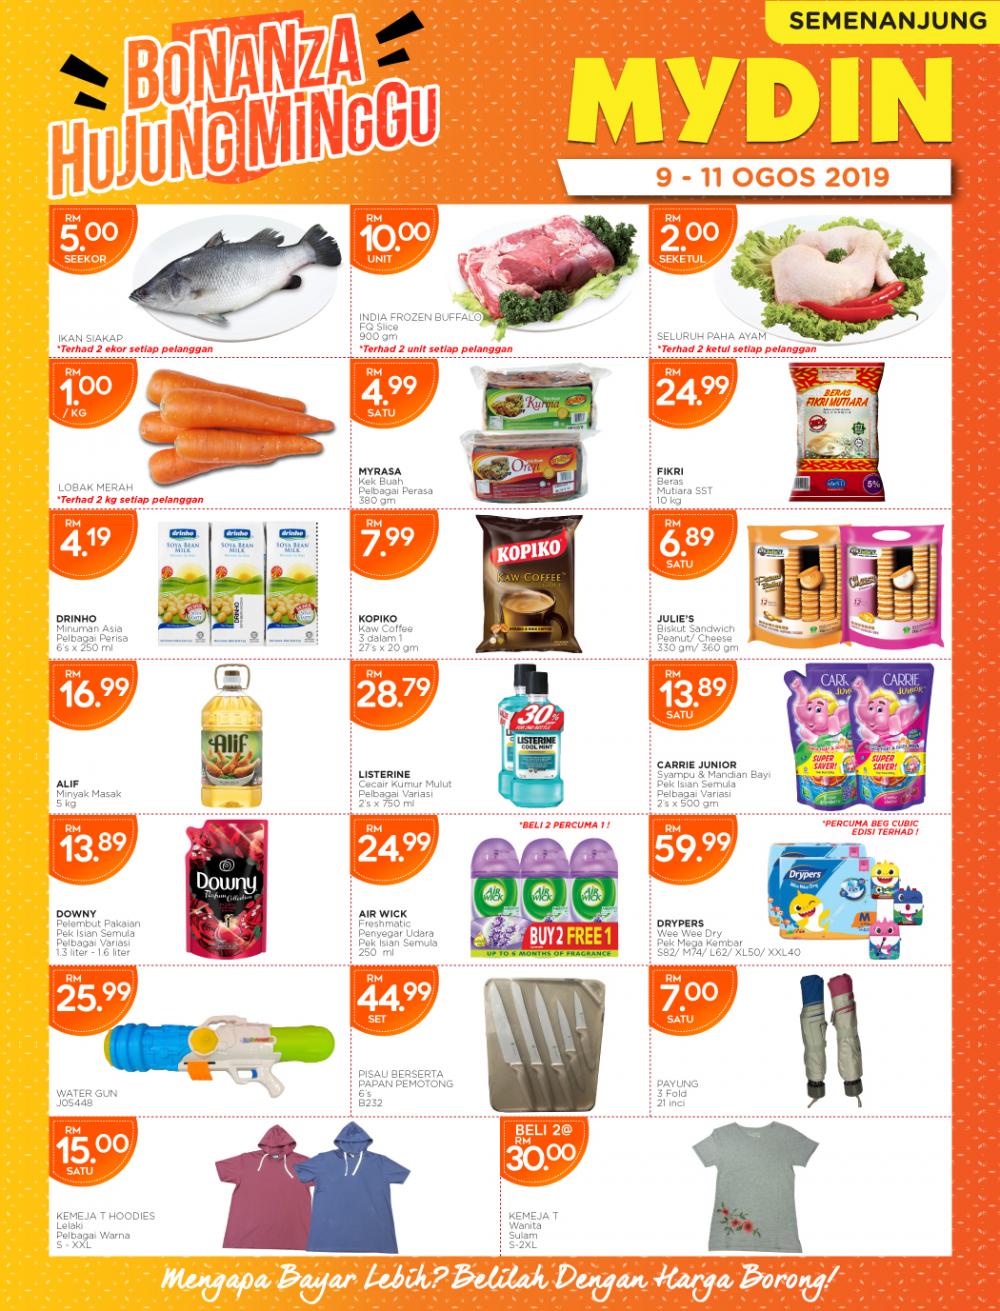 MYDIN Weekend Promotion (9 August 2019 - 11 August 2019)